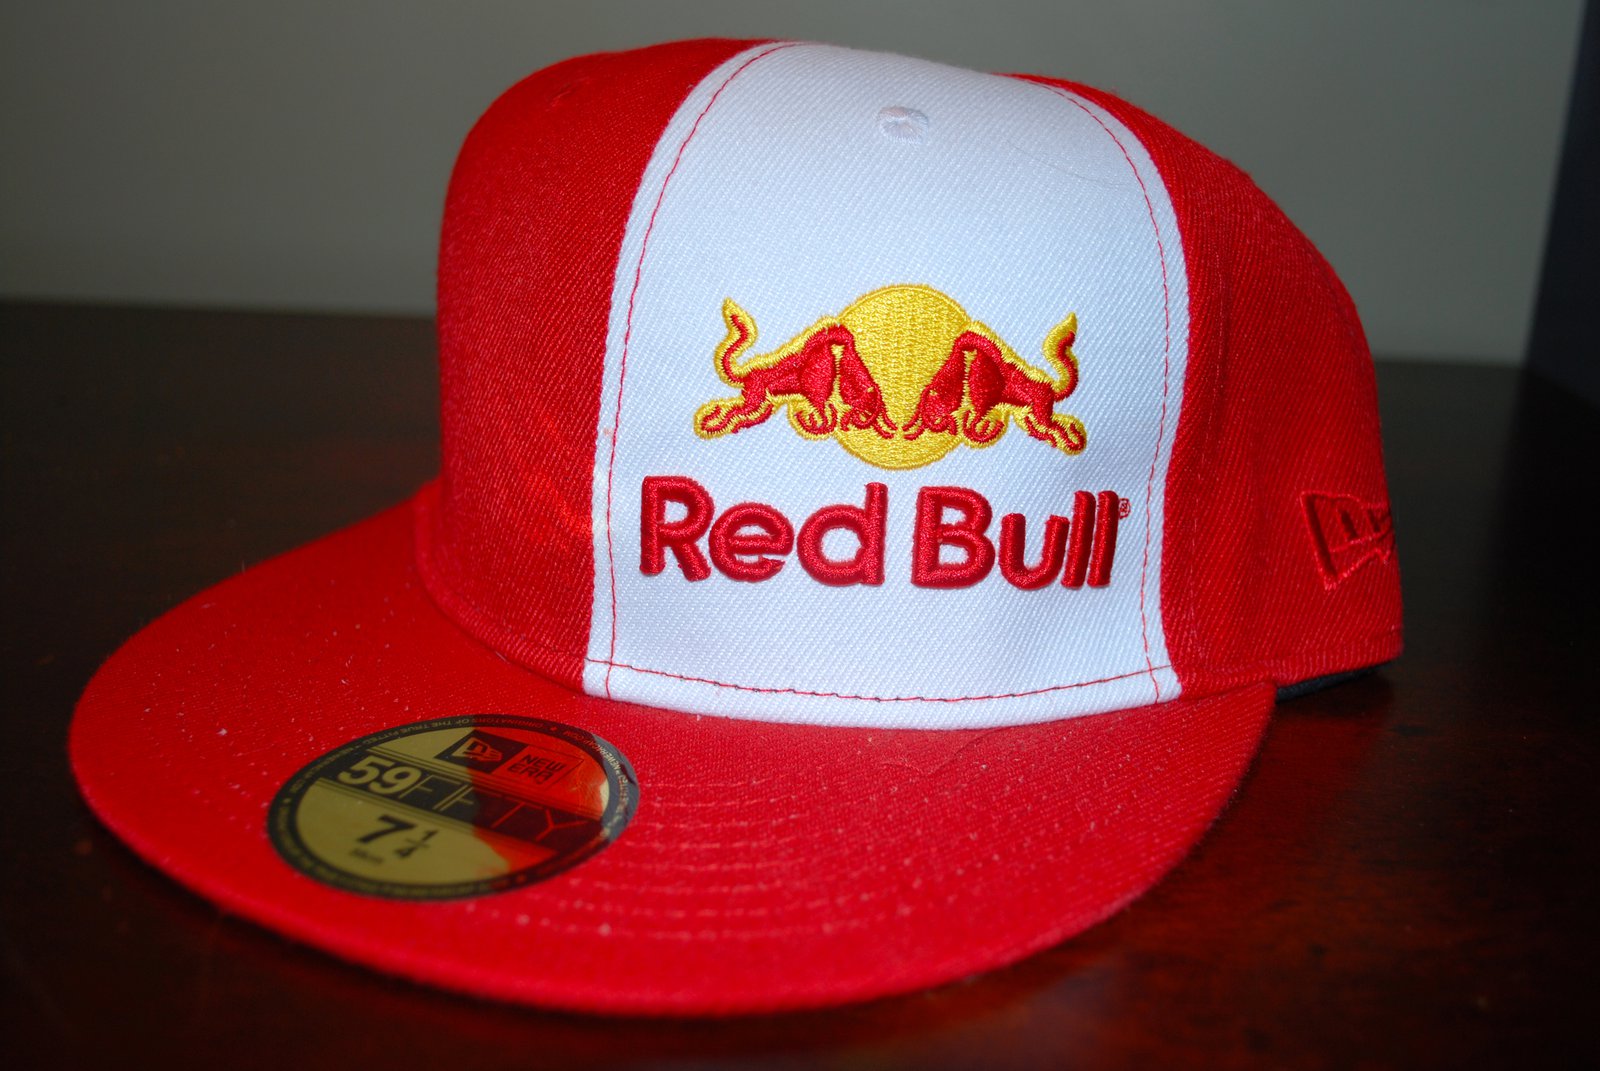 Red bull hat for sale